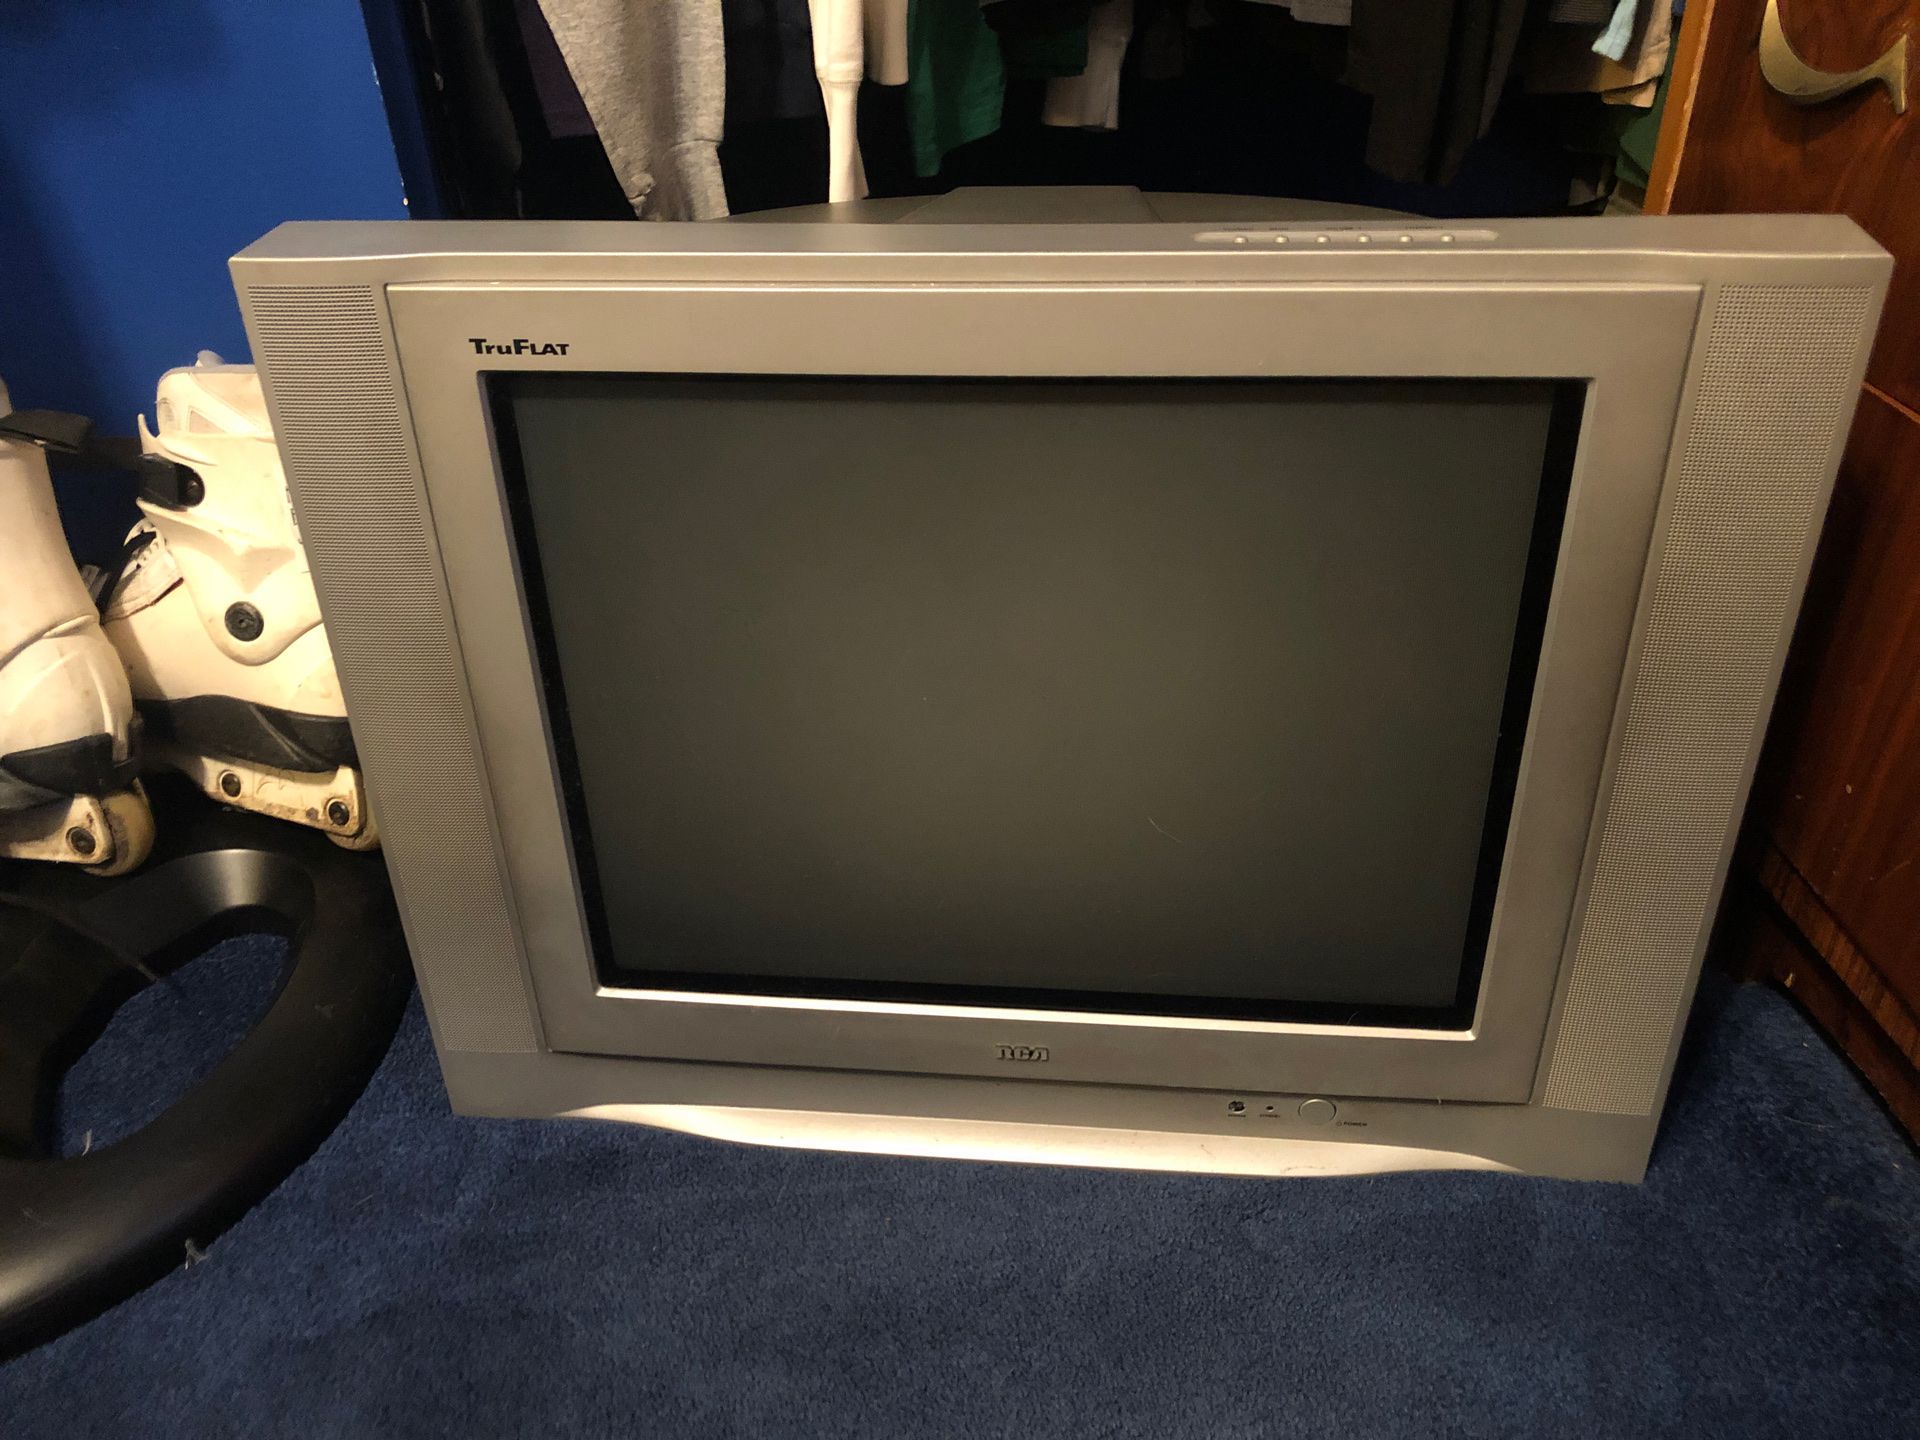 Tube tv 20” NEED GONE BY FRIDAY OR ITS GOING TO TRASH